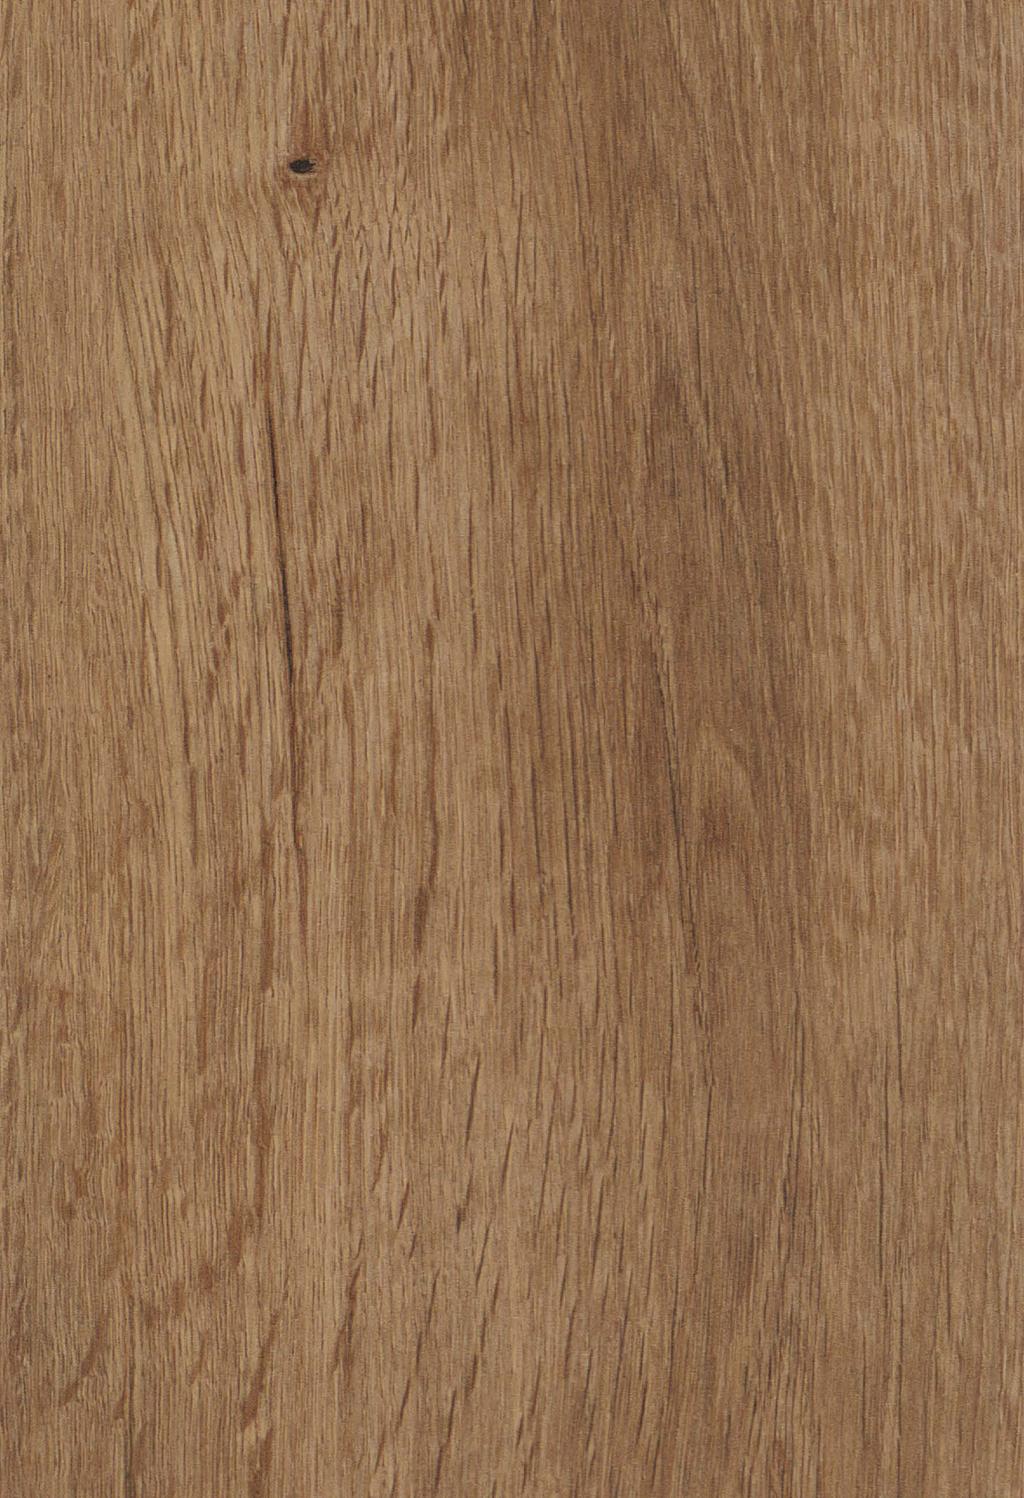 HEAVY COMMERCIAL LUXURY VINYL TILES WOOD Expona Design Wood richly encompasses premium designs, delicately depicting the natural charm of authentic timber.